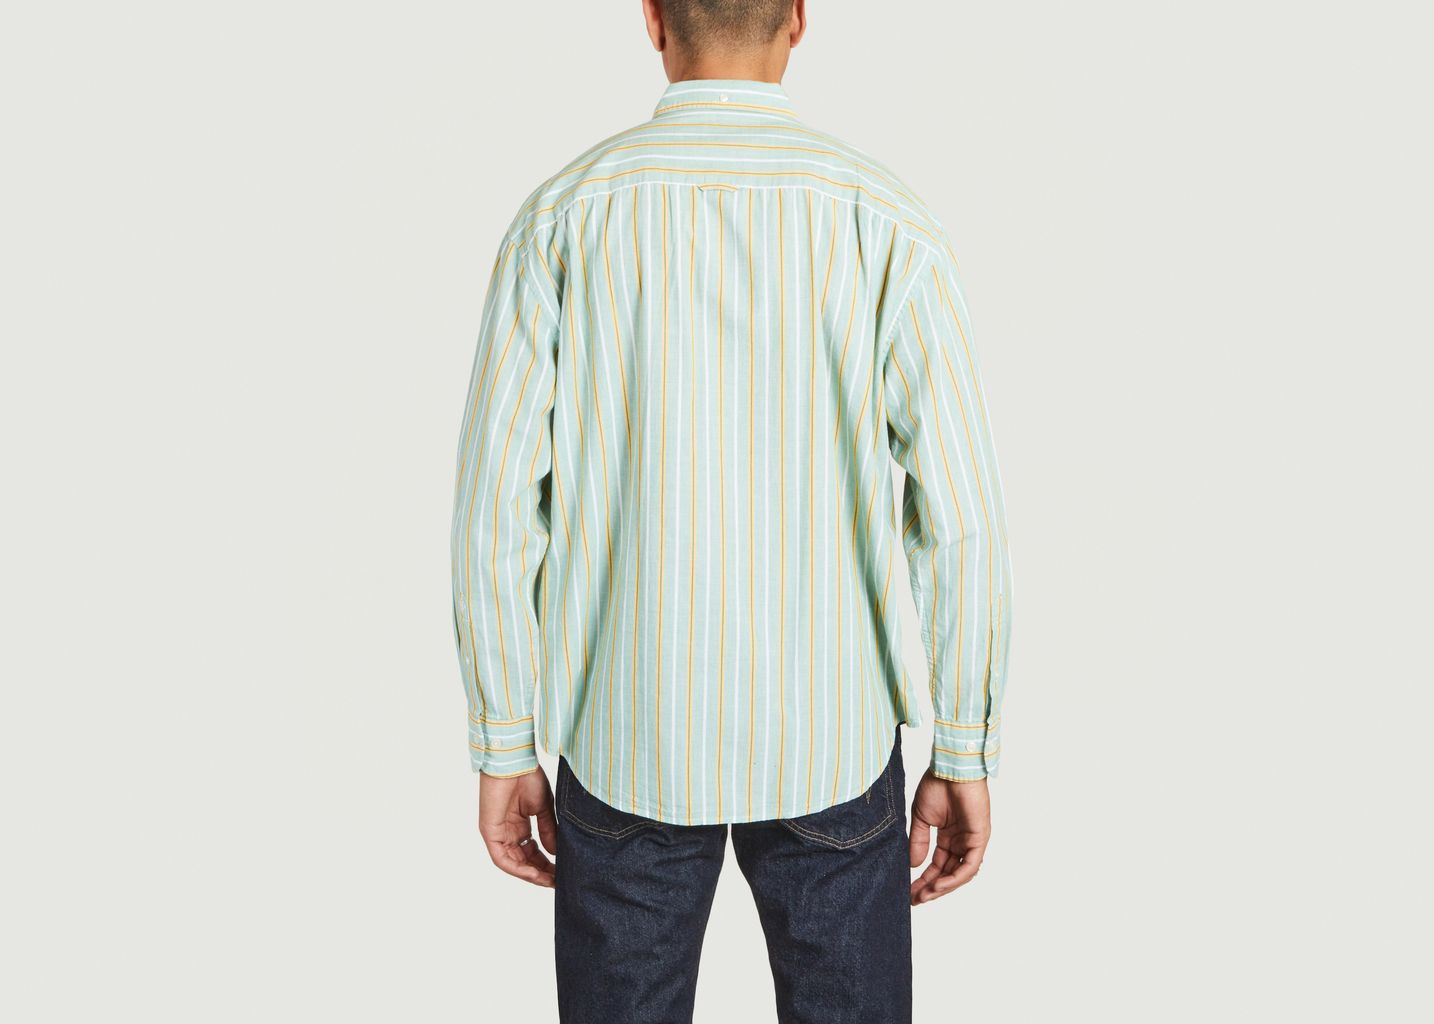 Relaxed Fit Shirt in BCI certified cotton thread count - Gant